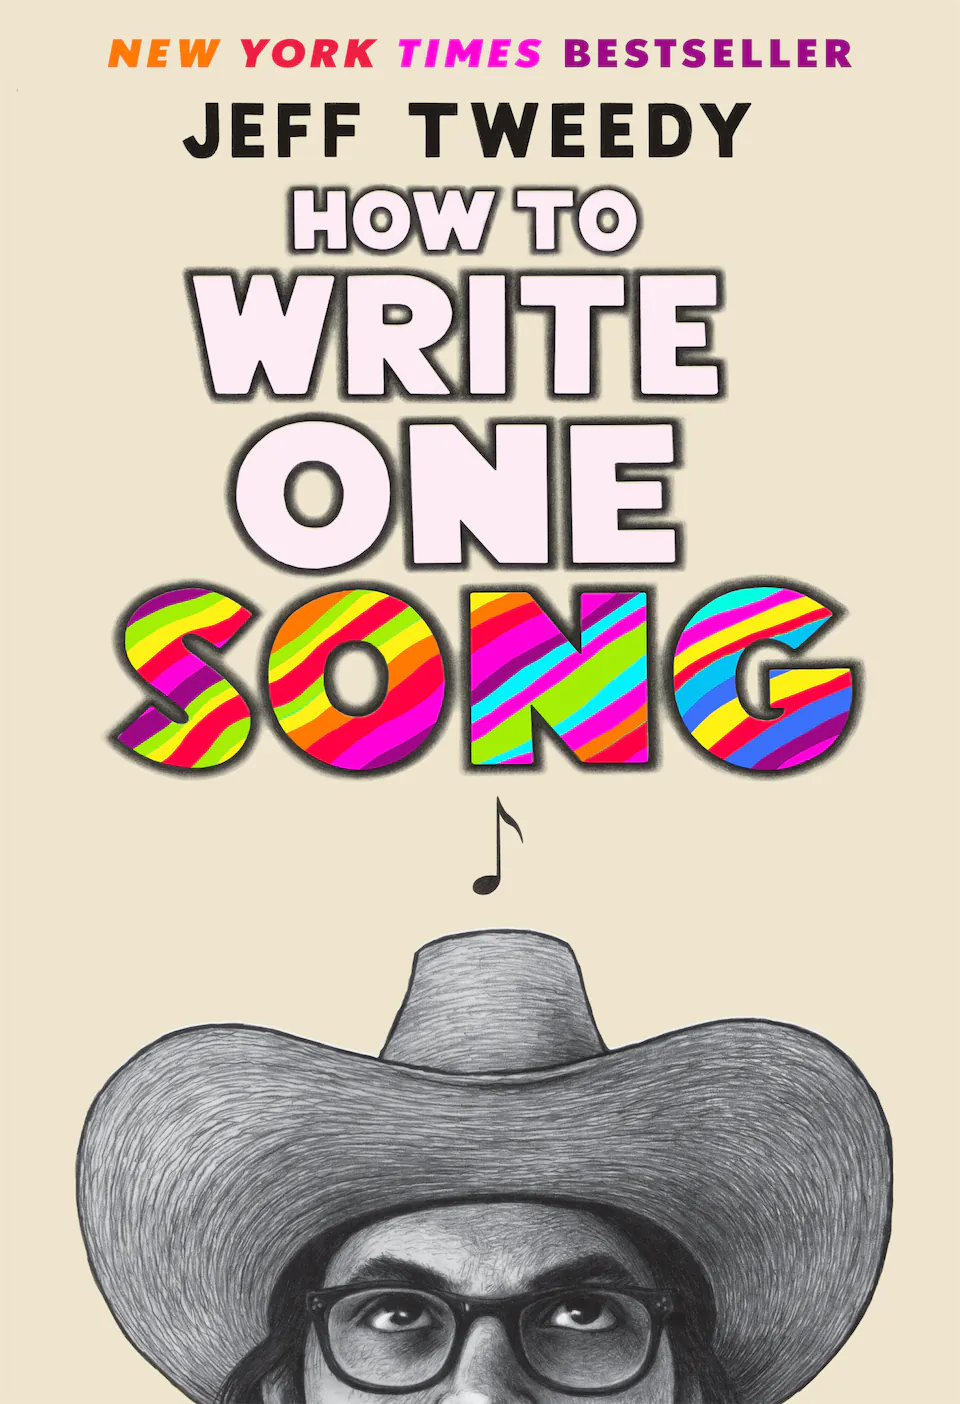 How To Write One Song by Jeff Tweedy finished on 2023 Oct 29